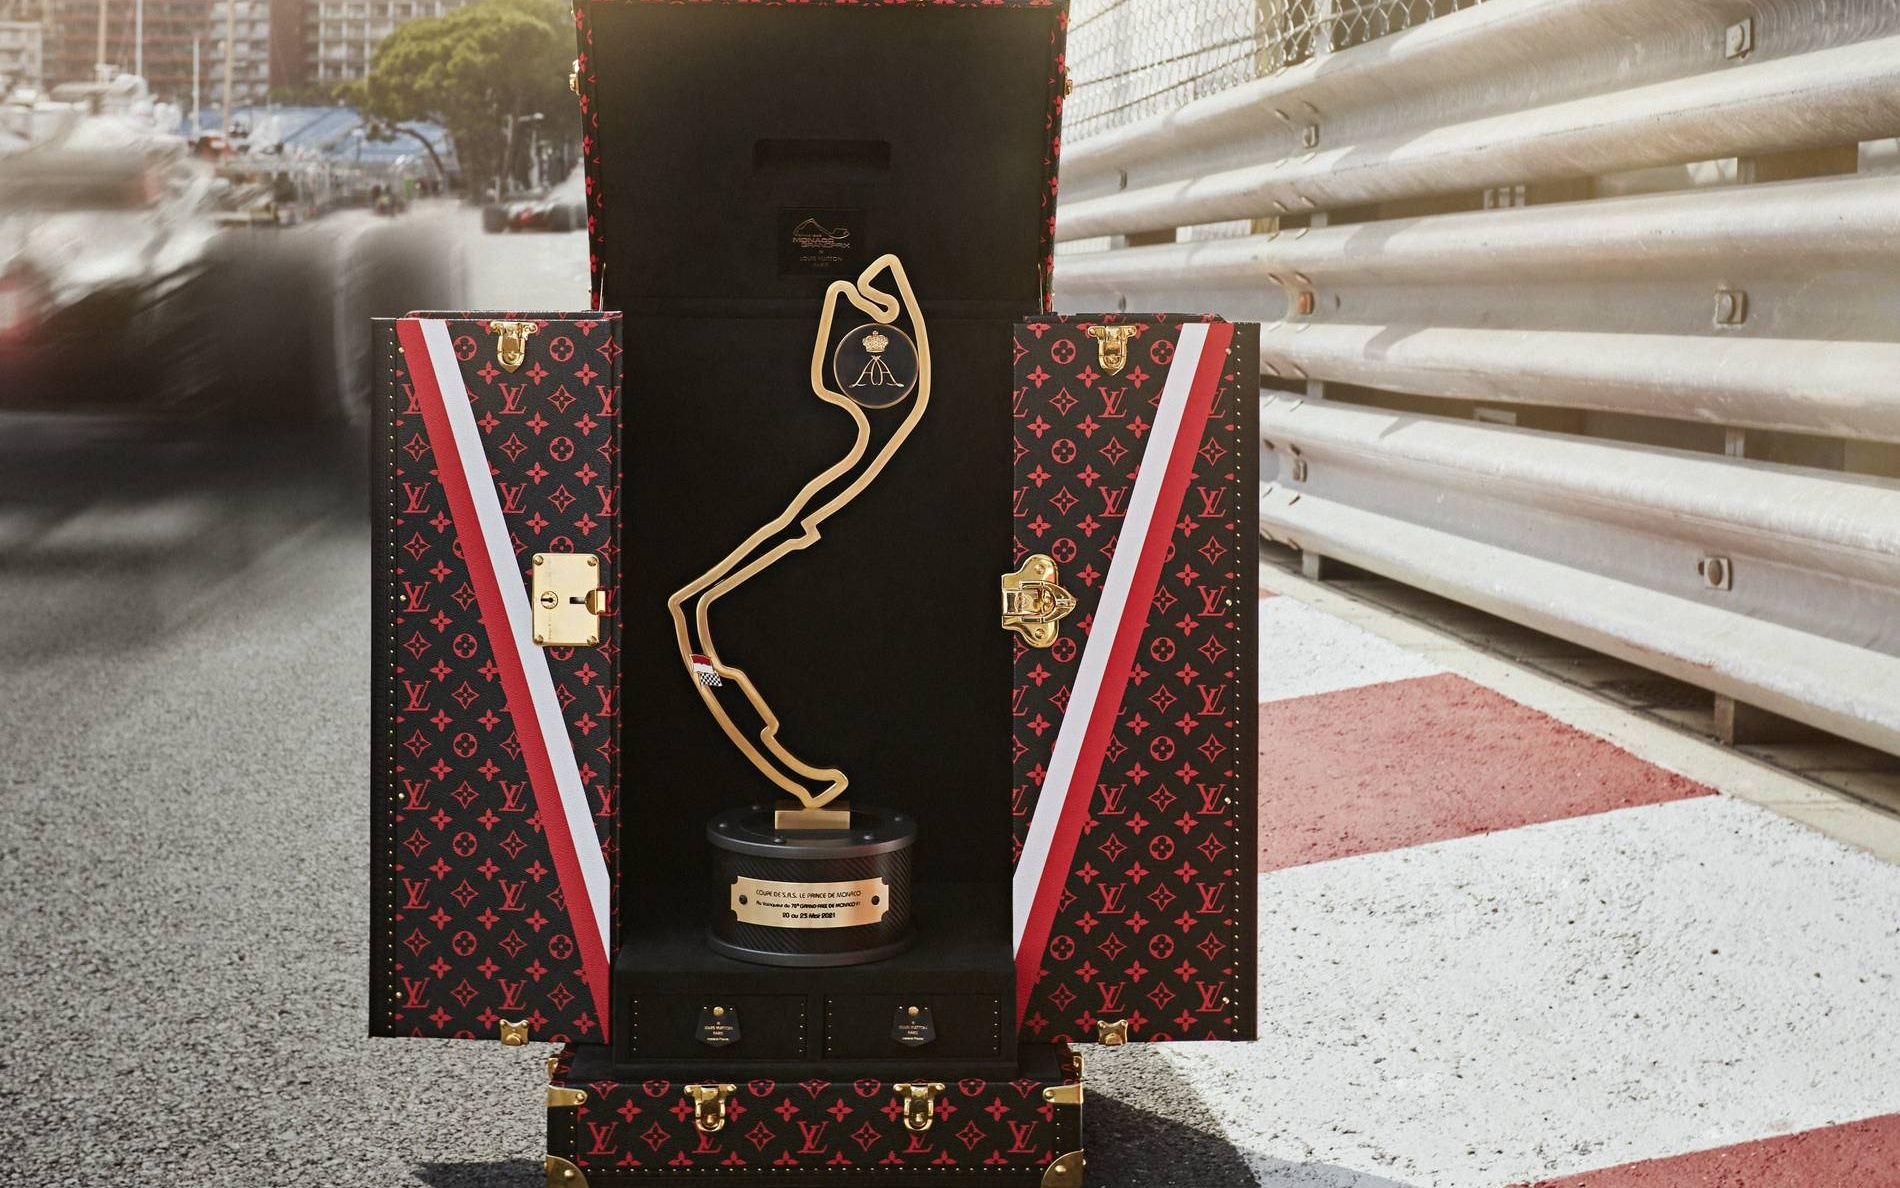 F1: Monaco Grand Prix Trophy to Travel First Class in Louis Vuitton Case -  Live Trading News